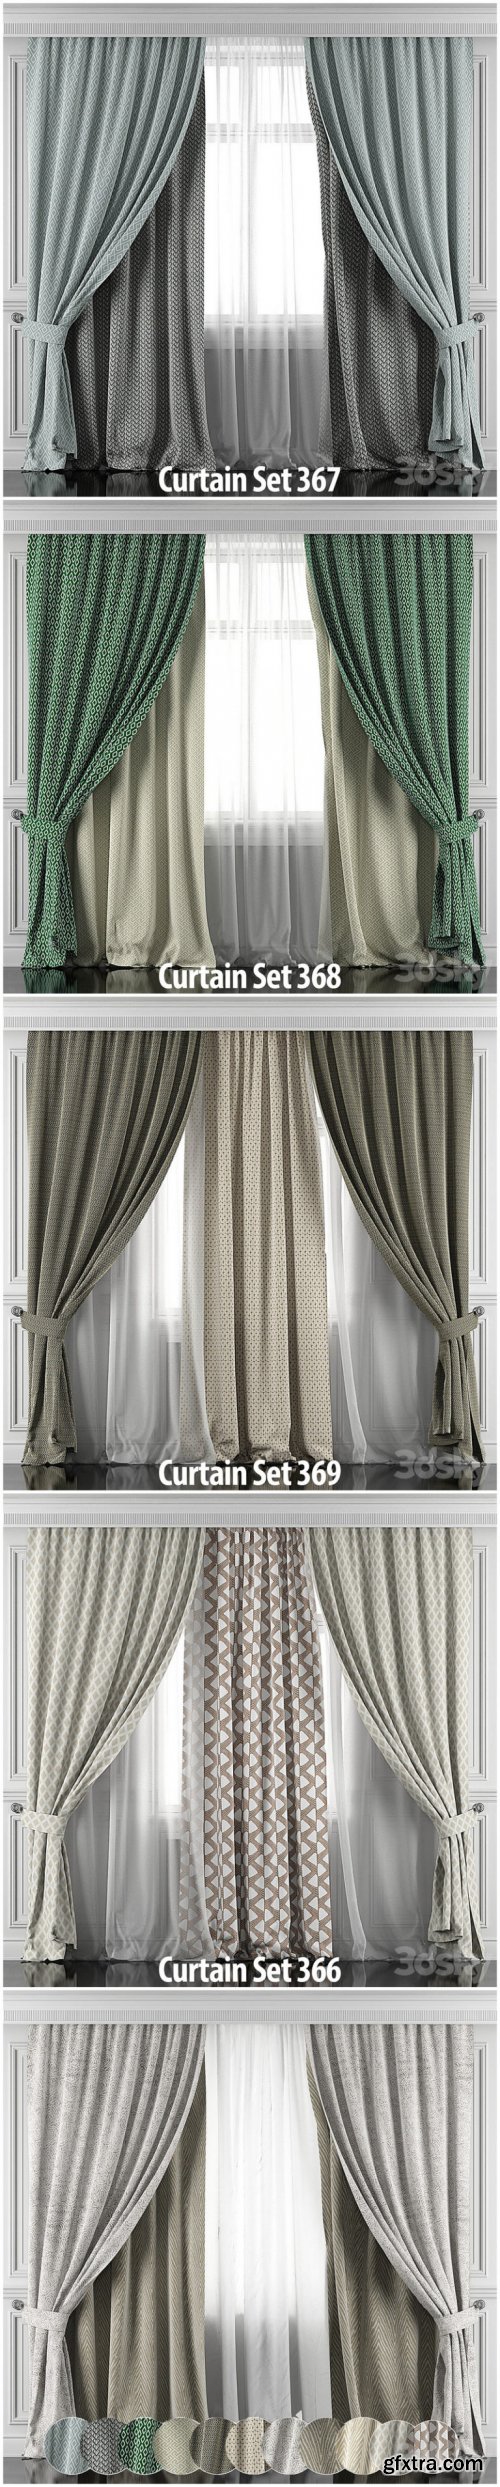 Curtains with window and moldings 366-371